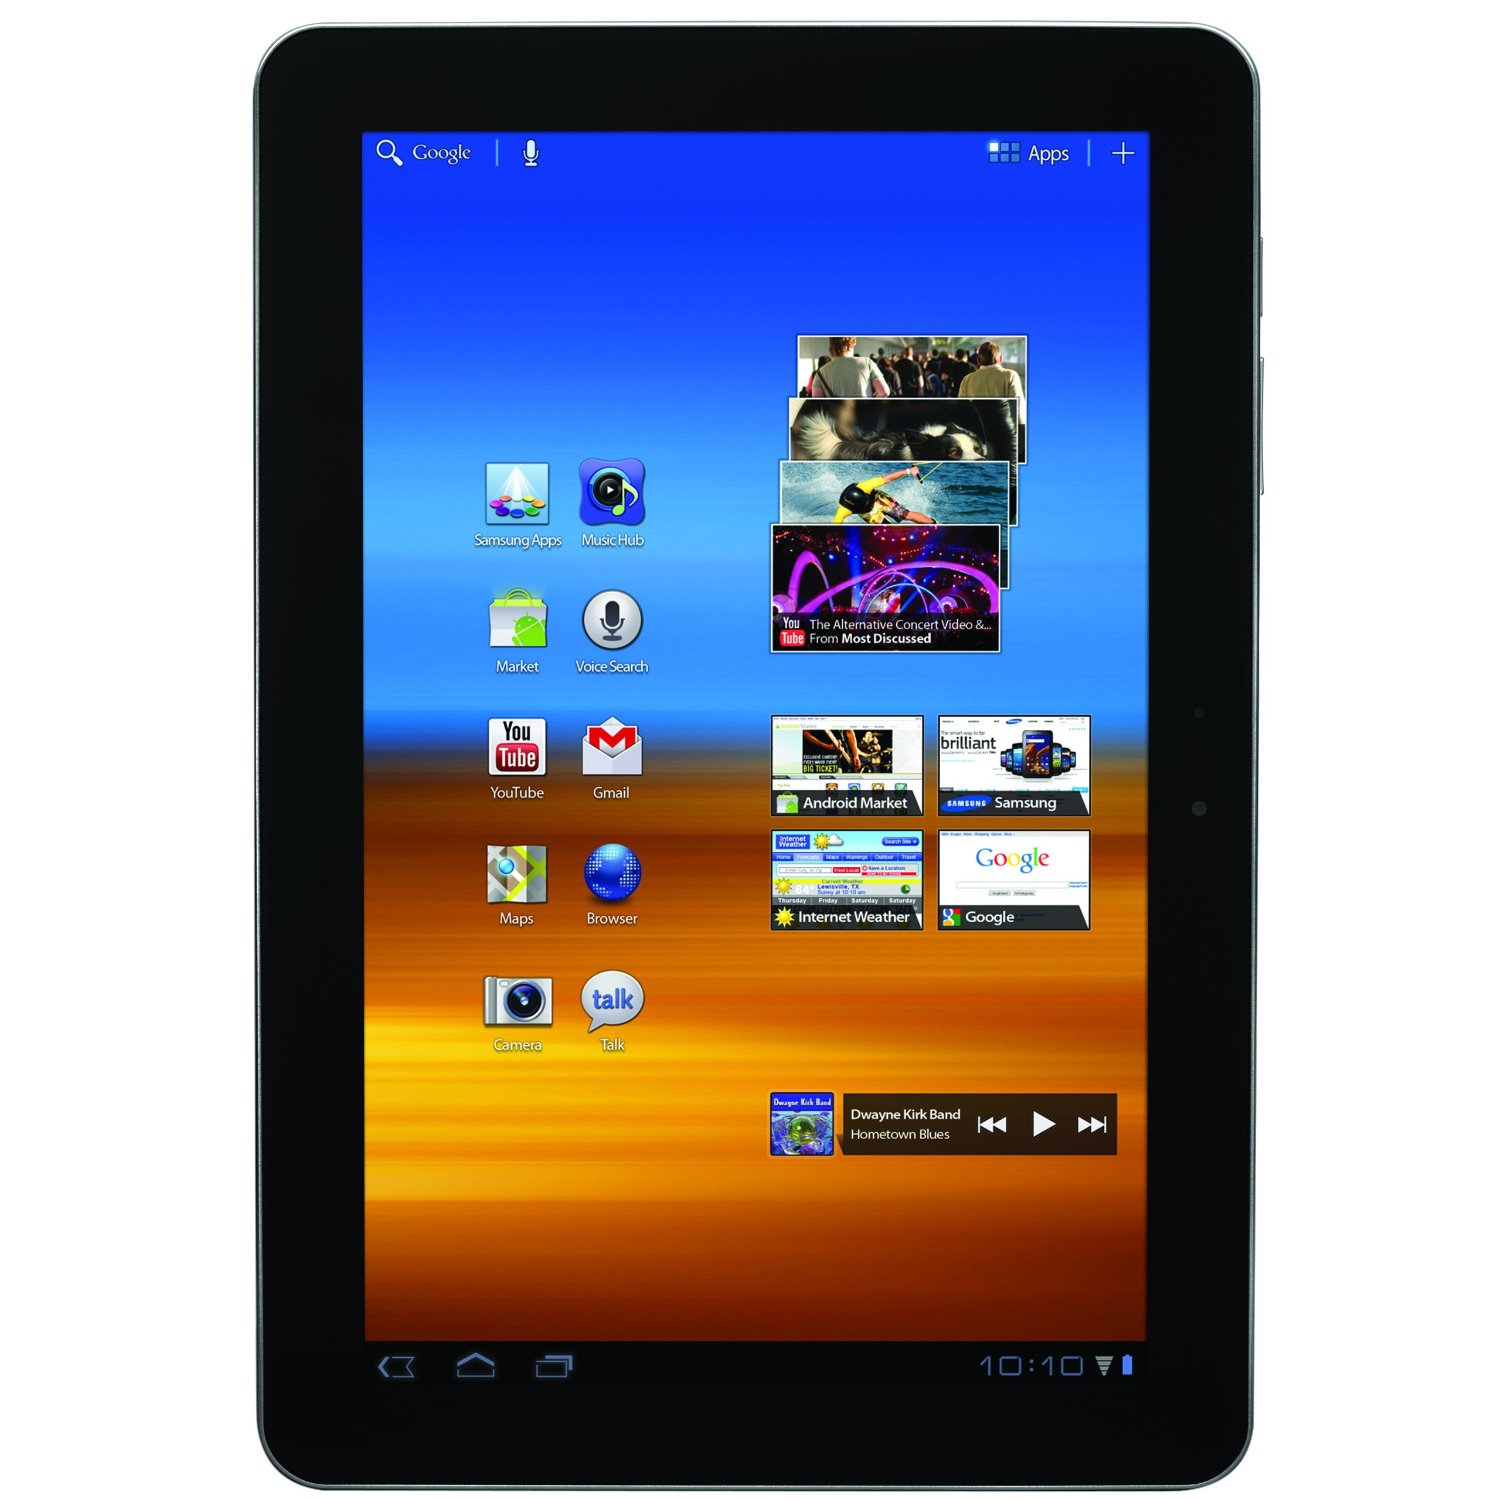 http://thetechjournal.com/wp-content/uploads/images/1108/1313121580-samsung-galaxy-101inch-tablet-with-16gb-wifi-5.jpg